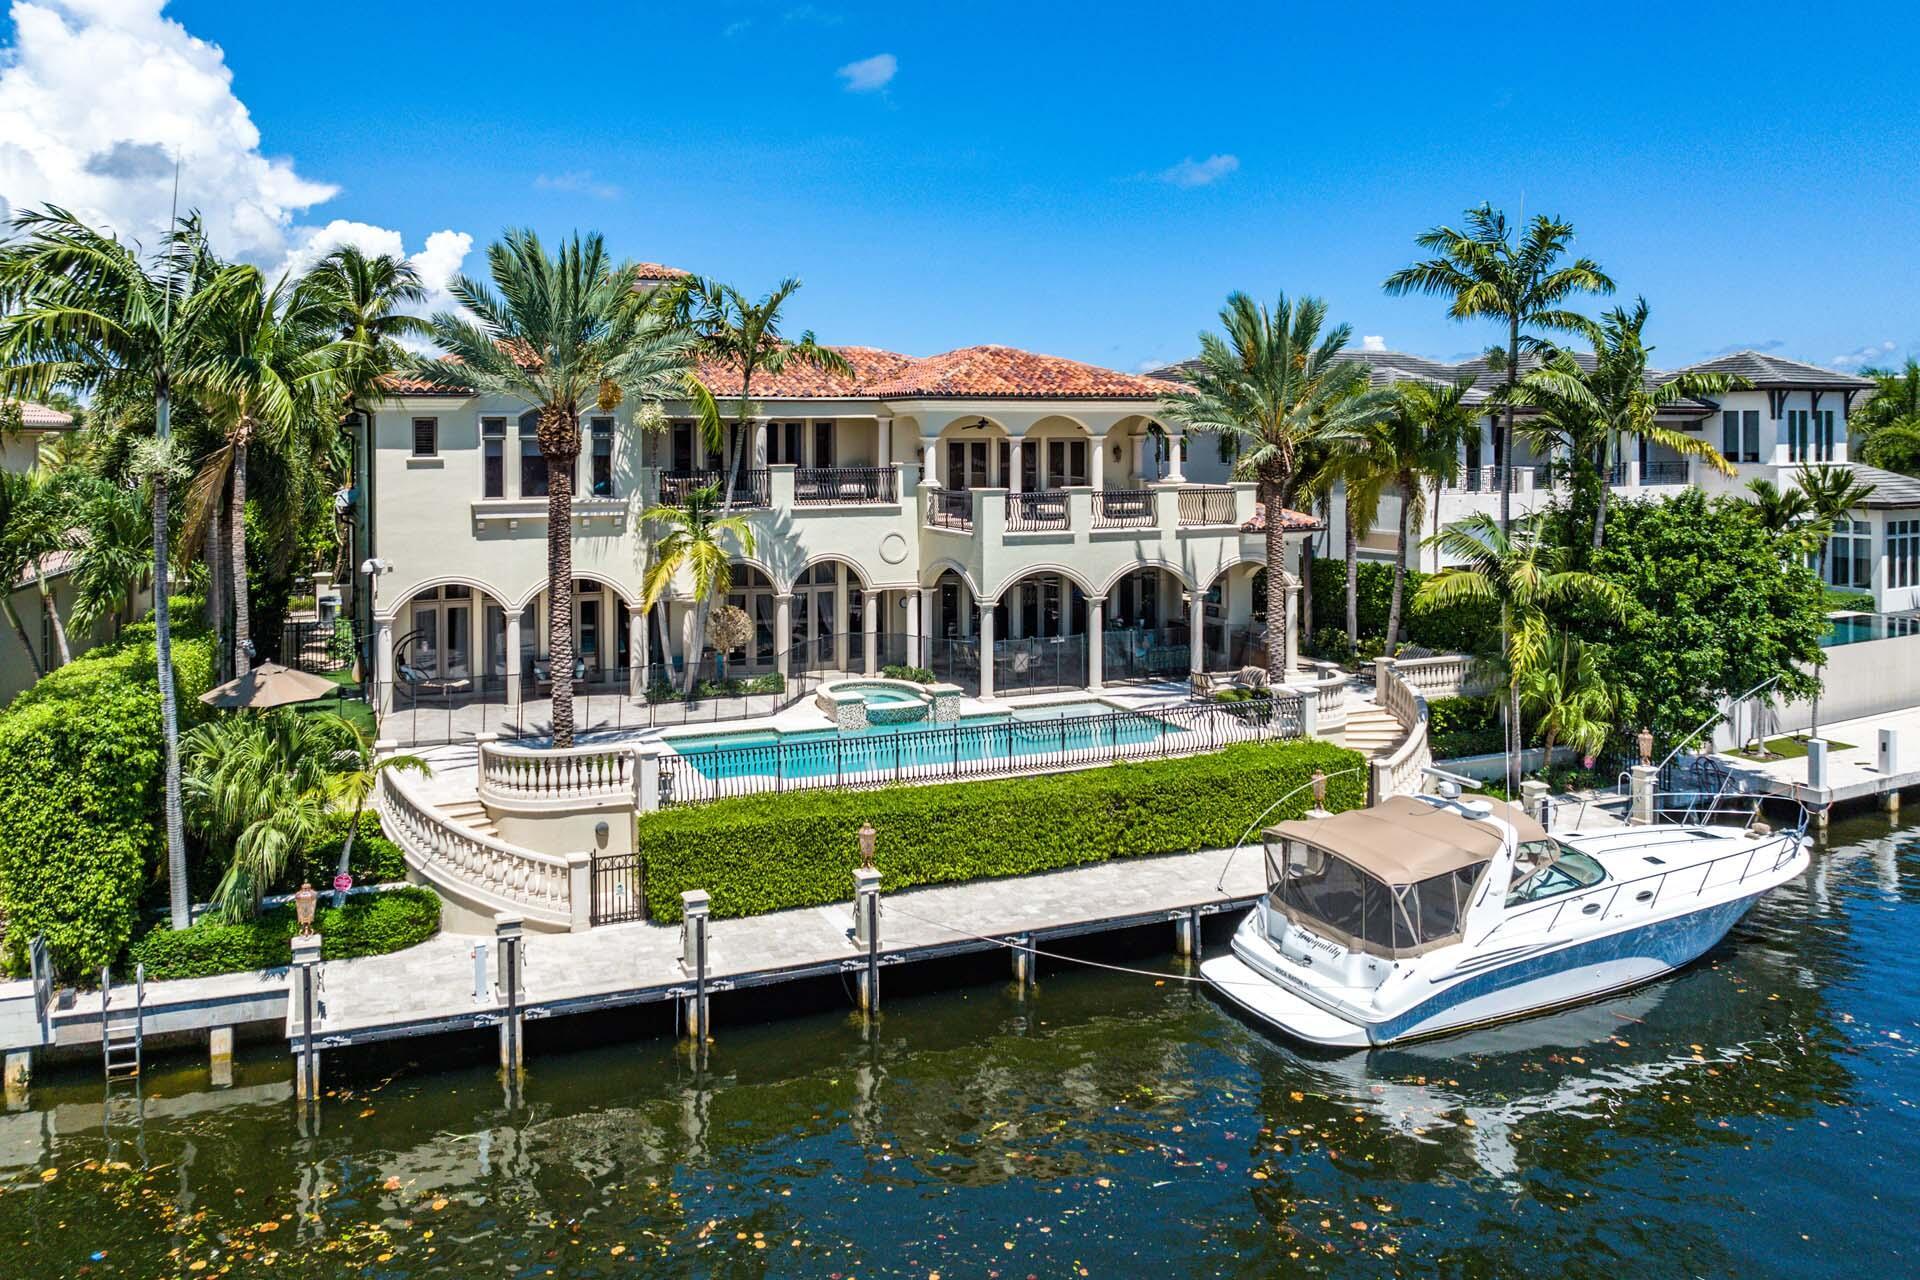 Casa Rosa is a grand waterfront estate located on 112' of the most expansive waterway in Royal Palm Yacht & Country Club. Set behind a gated motor court with pristine tropical grounds, this remarkable 7,900+ sf estate was imagined by Benedict Architecture and garnished with designer finishes by Marc Michaels Interiors. From the imported Portuguese limestone floor to the generous hand-carved trim, there were no details overlooked. The 5-bedroom, 6.1-bathroom home offers an oversized chef's kitchen, home theater, handsome clubroom, private study, 3 fireplaces, elevator, and spacious second-floor lounge. The main suite enjoys waterway views from the covered balcony, a massive suite with sitting areas, and beyond the foyer reception are His & Her spa-like bathrooms with boutique closets. The